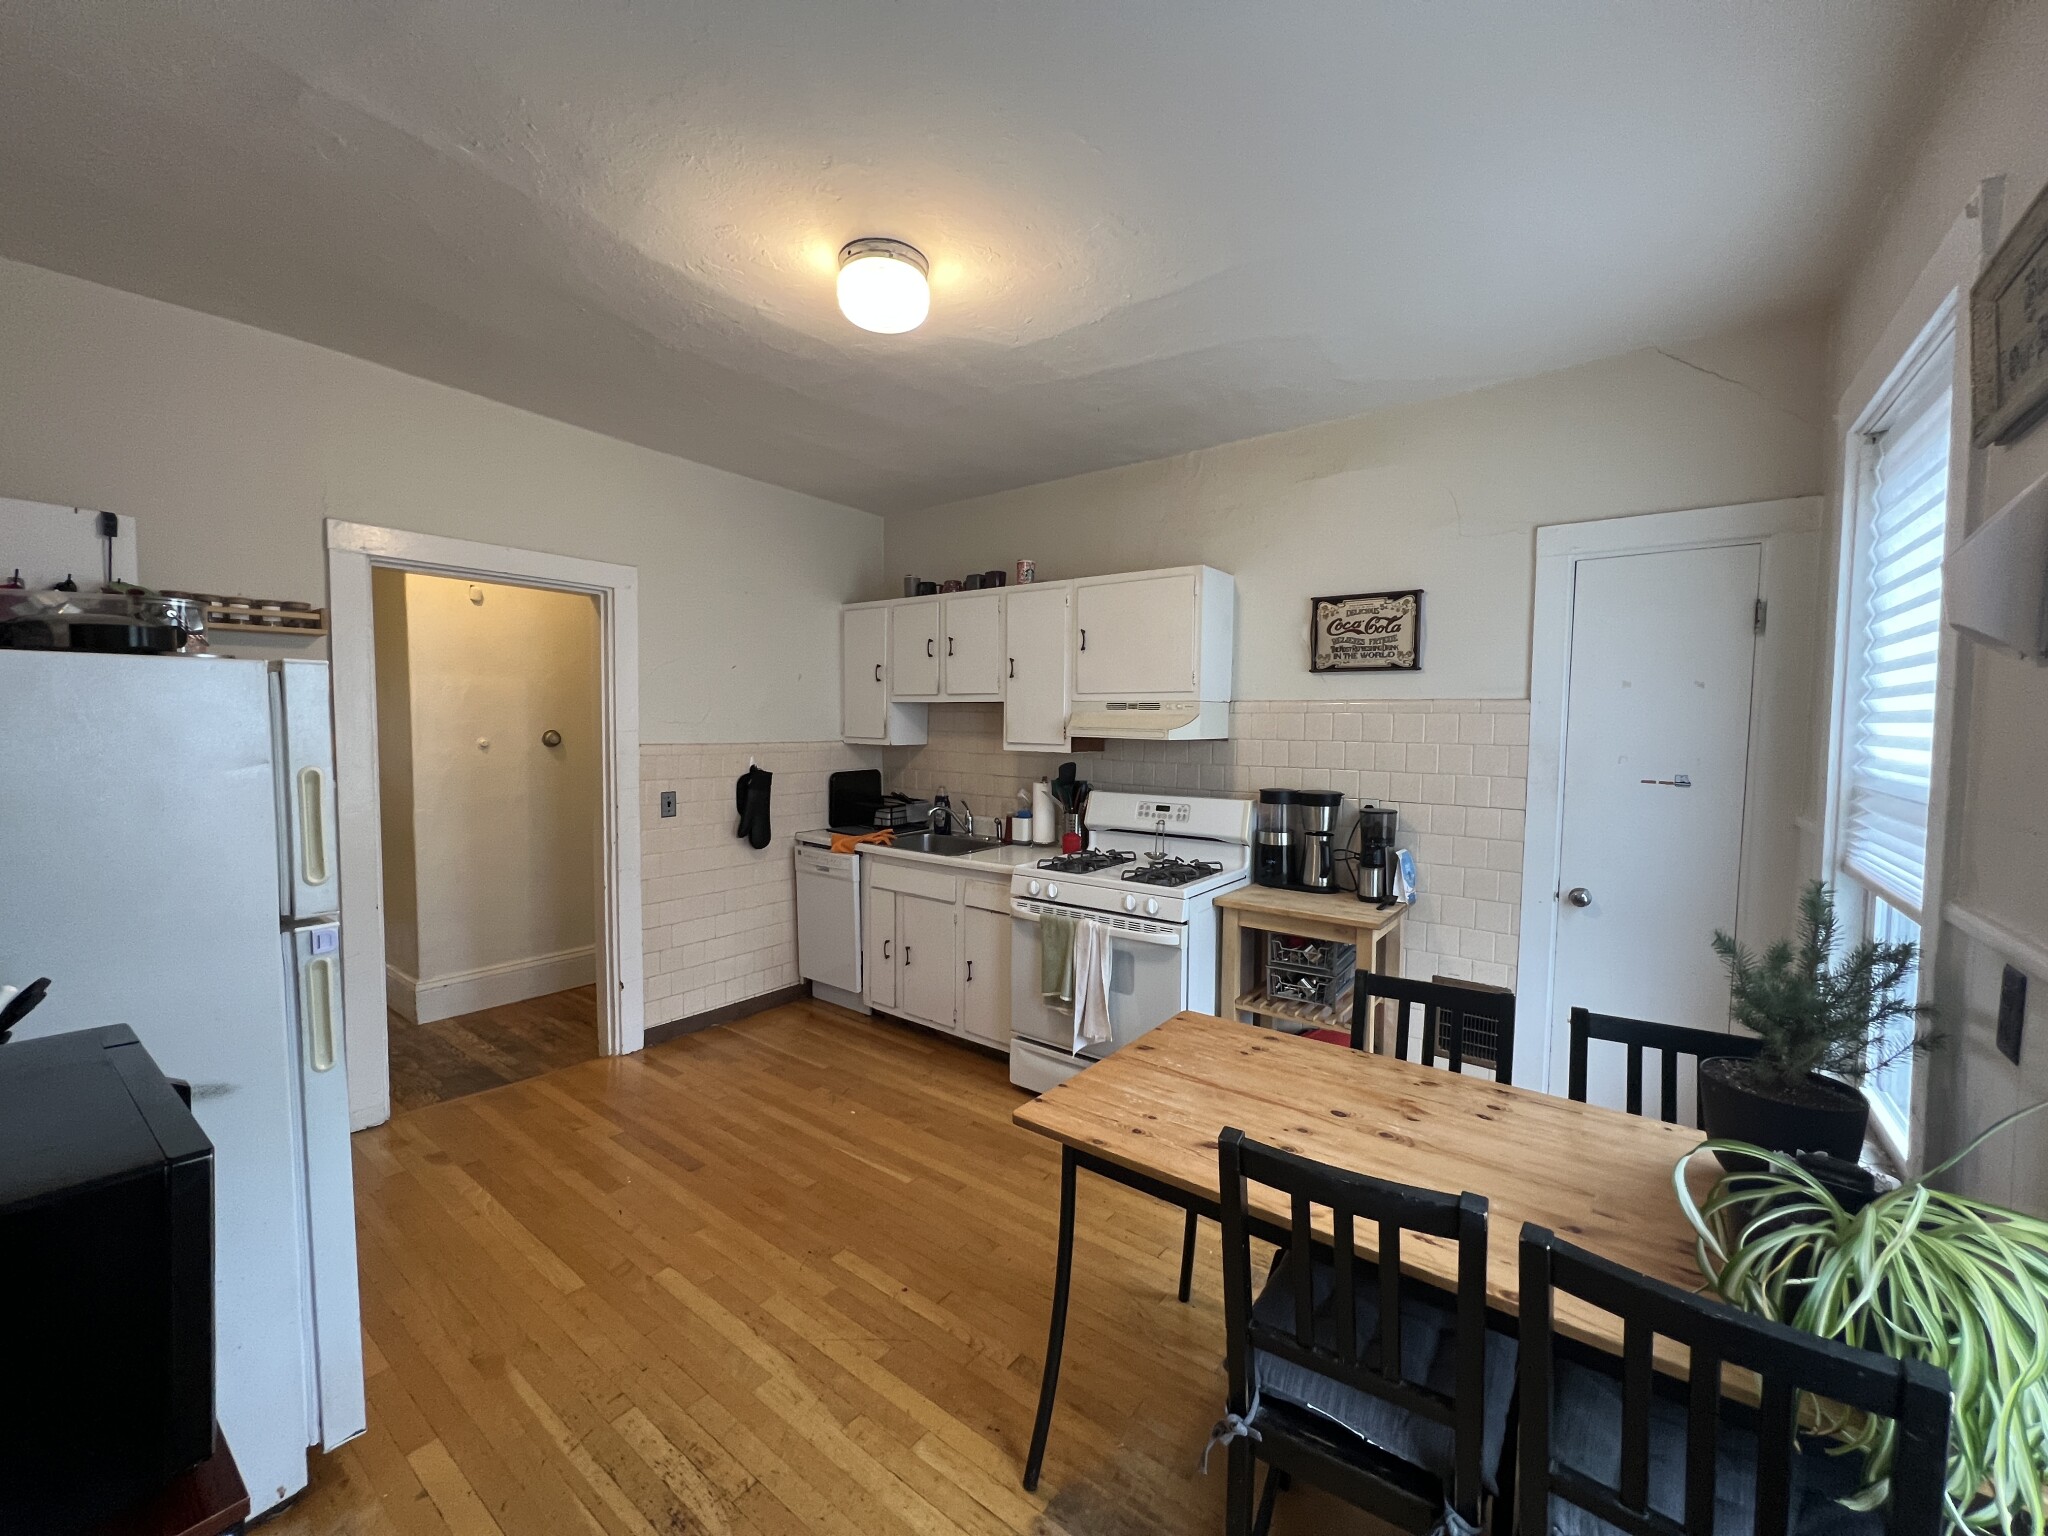 Photos of apartment on Highland Ave.,Somerville MA 02143